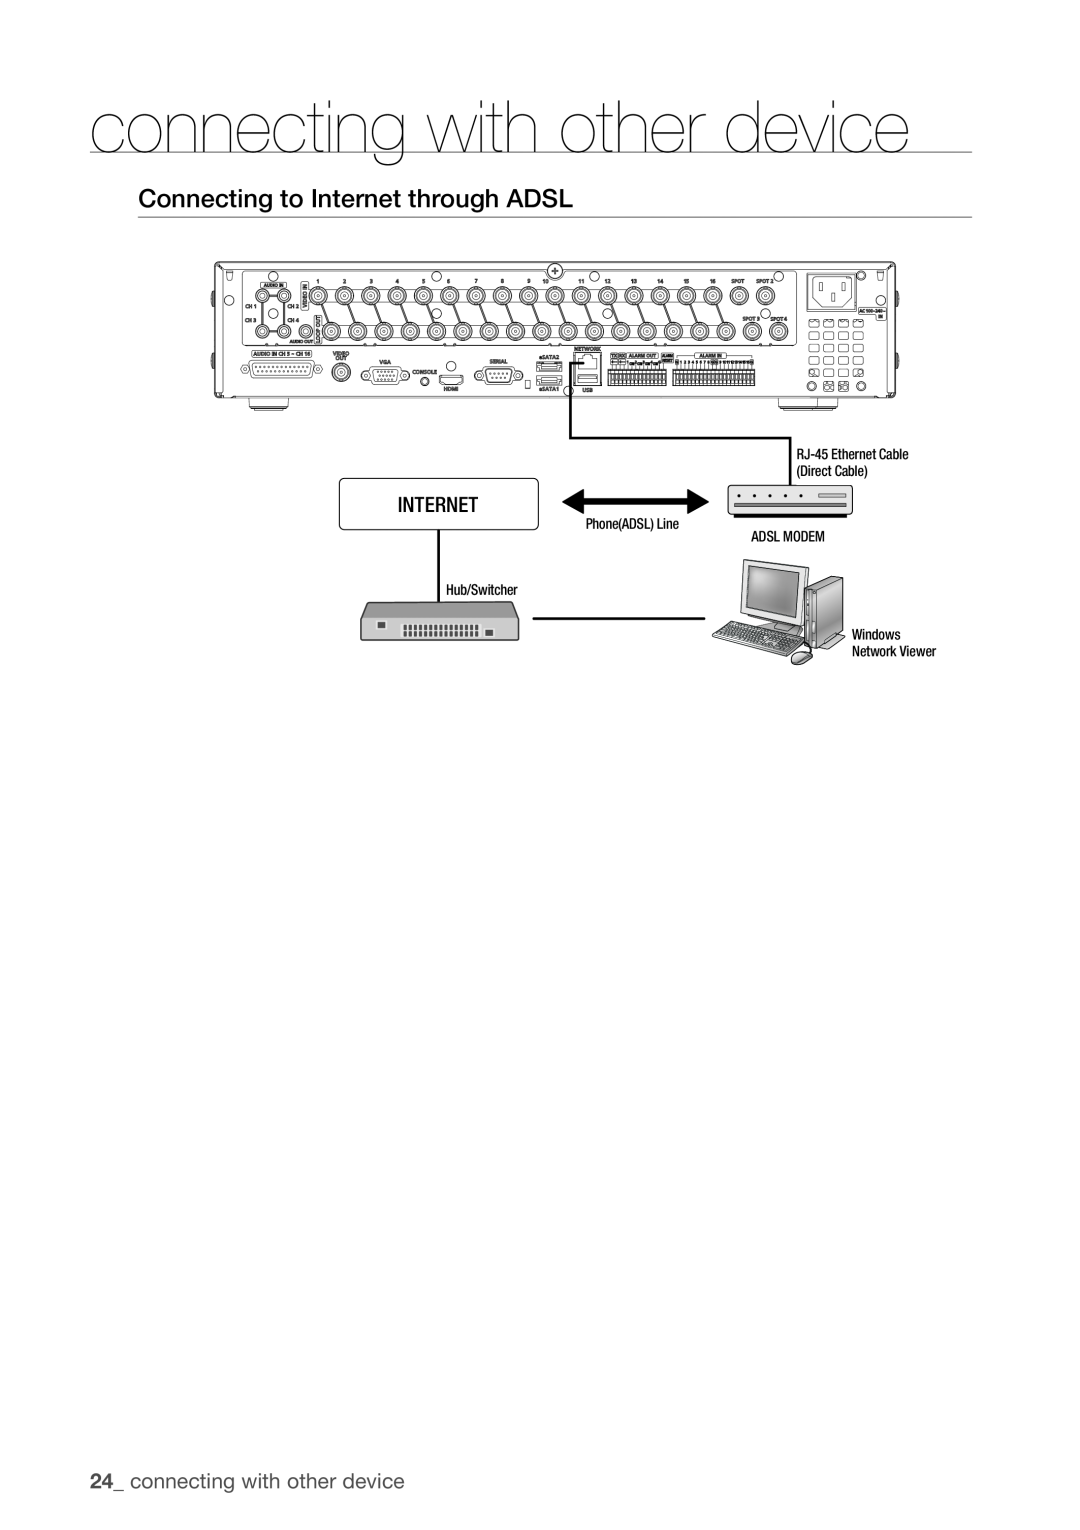 Samsung SRD-1610, 870D, 1670D, 1650D, SRD-850D, SRD-830D Connecting to Internet through ADSL, connecting with other device 